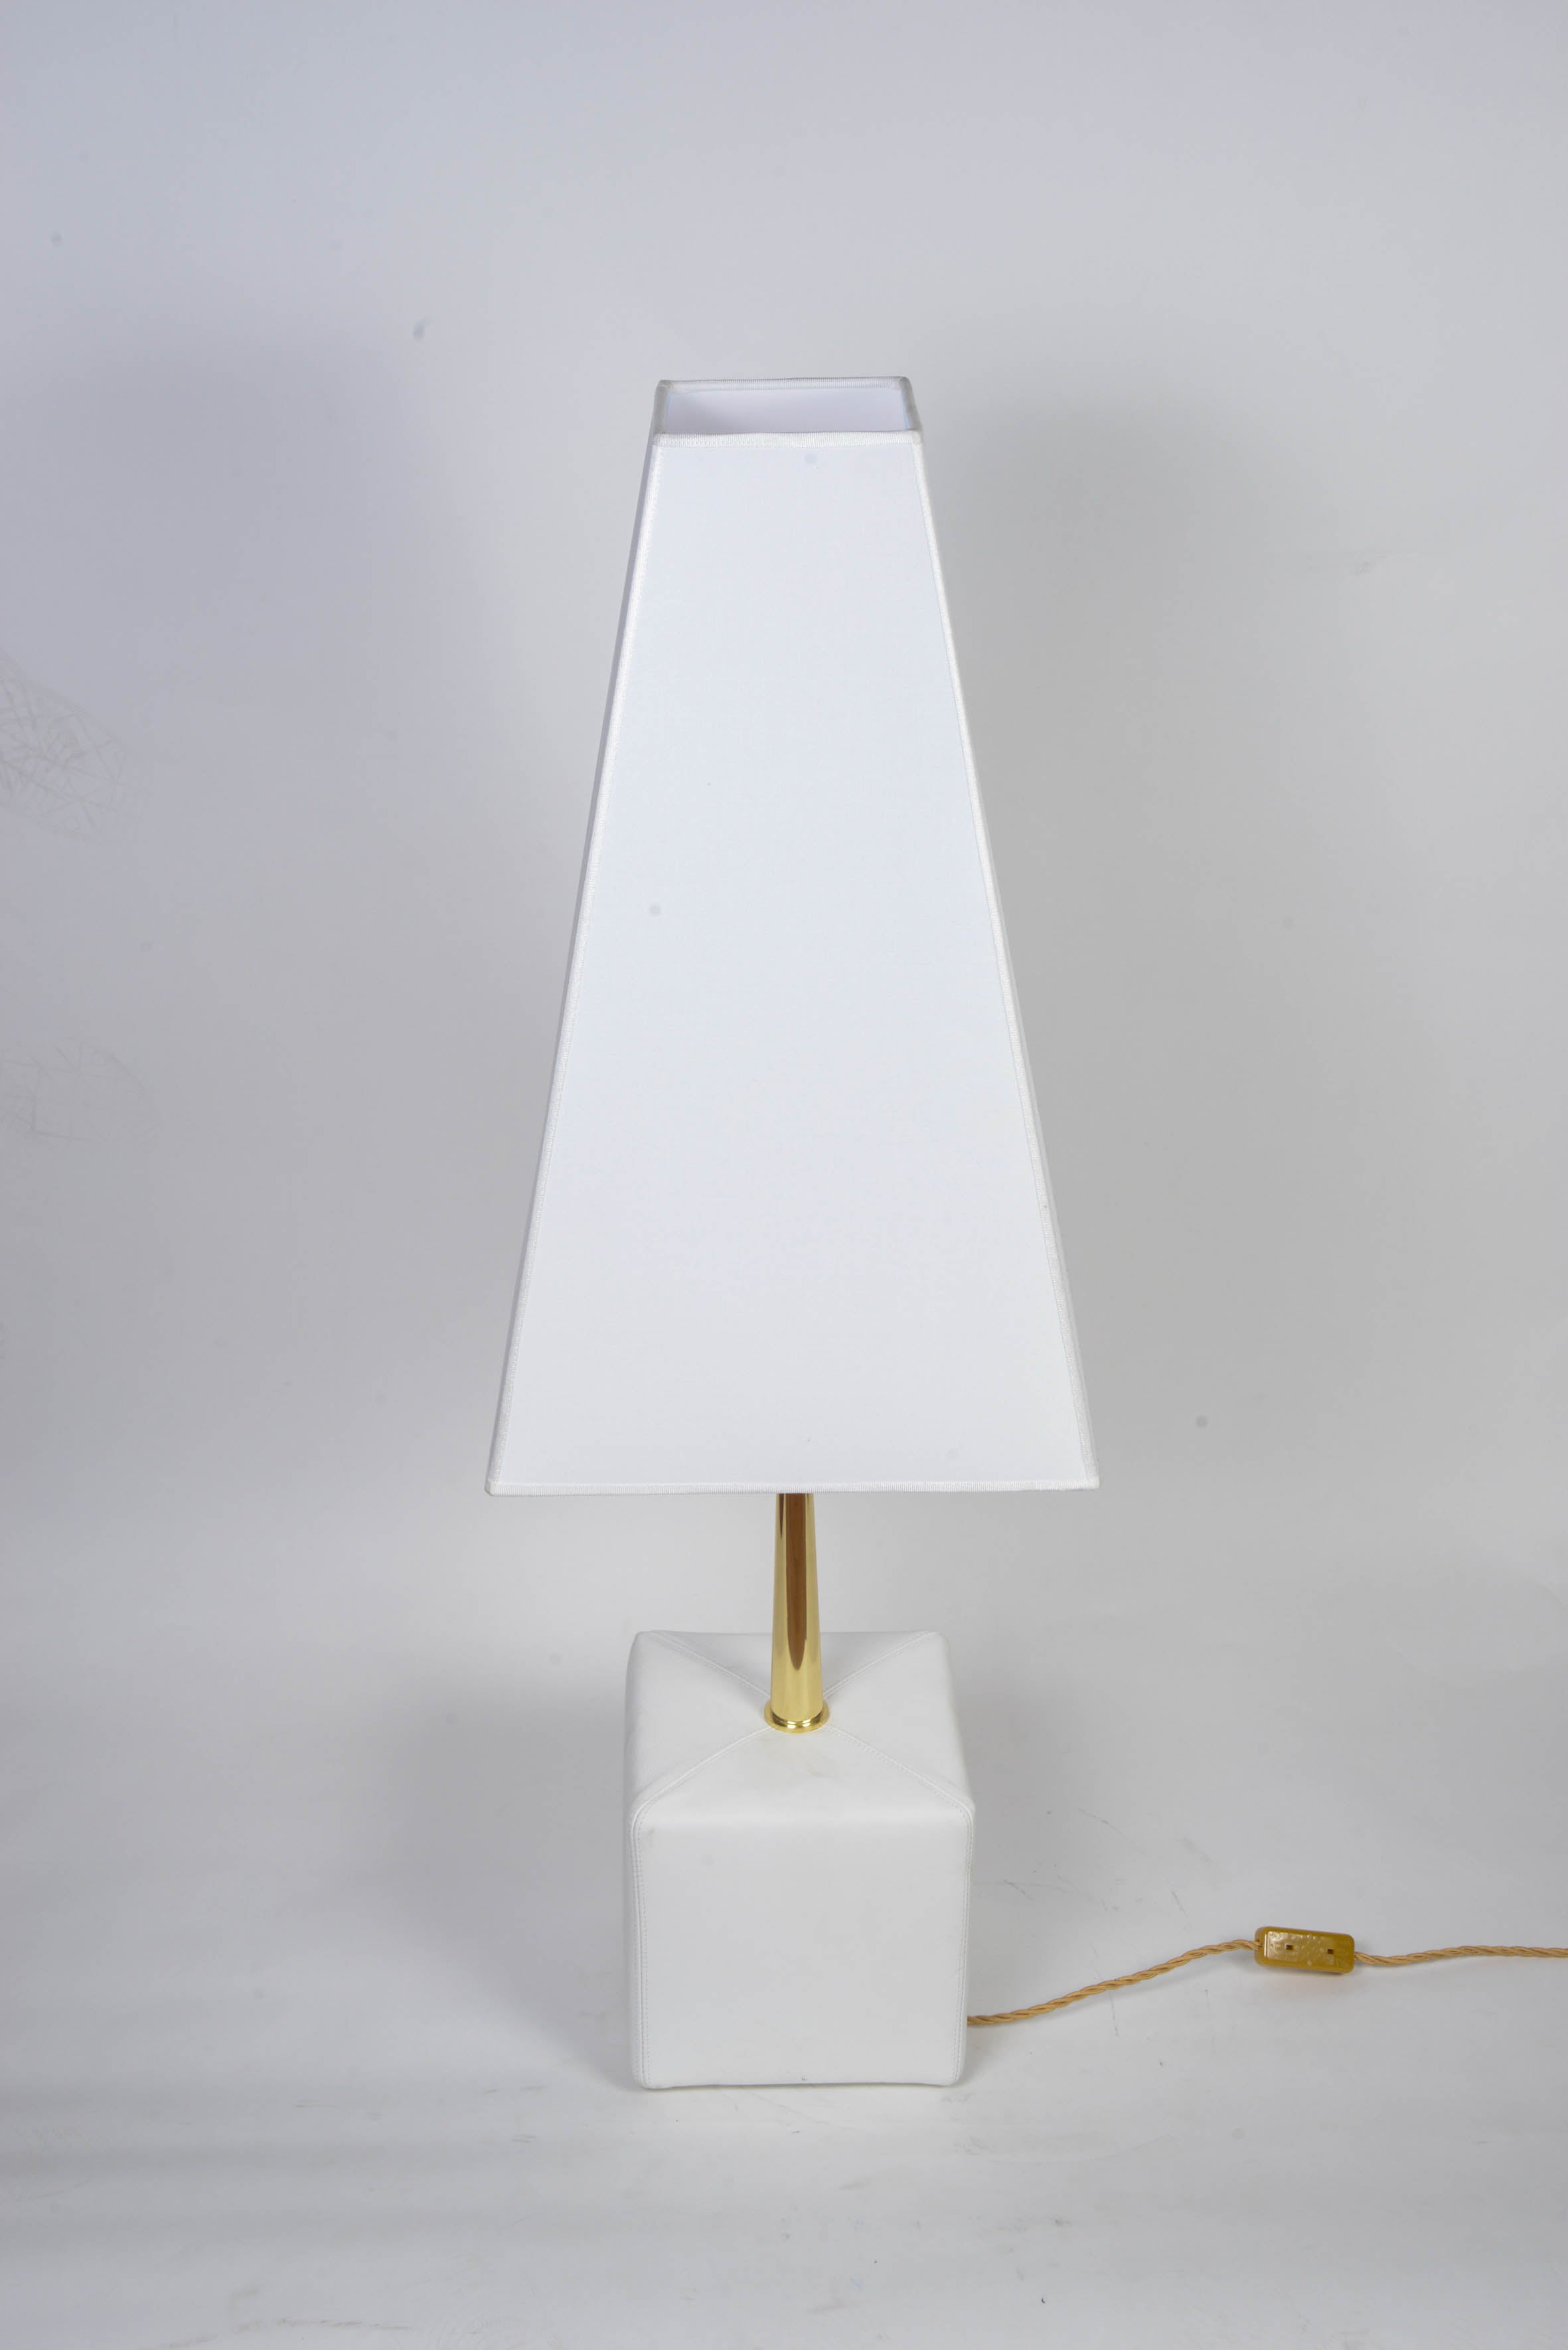 Pair of lamps designed by Angelo Brotto and made by Esperia editions.
Each lamp is made of a leather white square and a shining brass stem, finished by a tall shade.